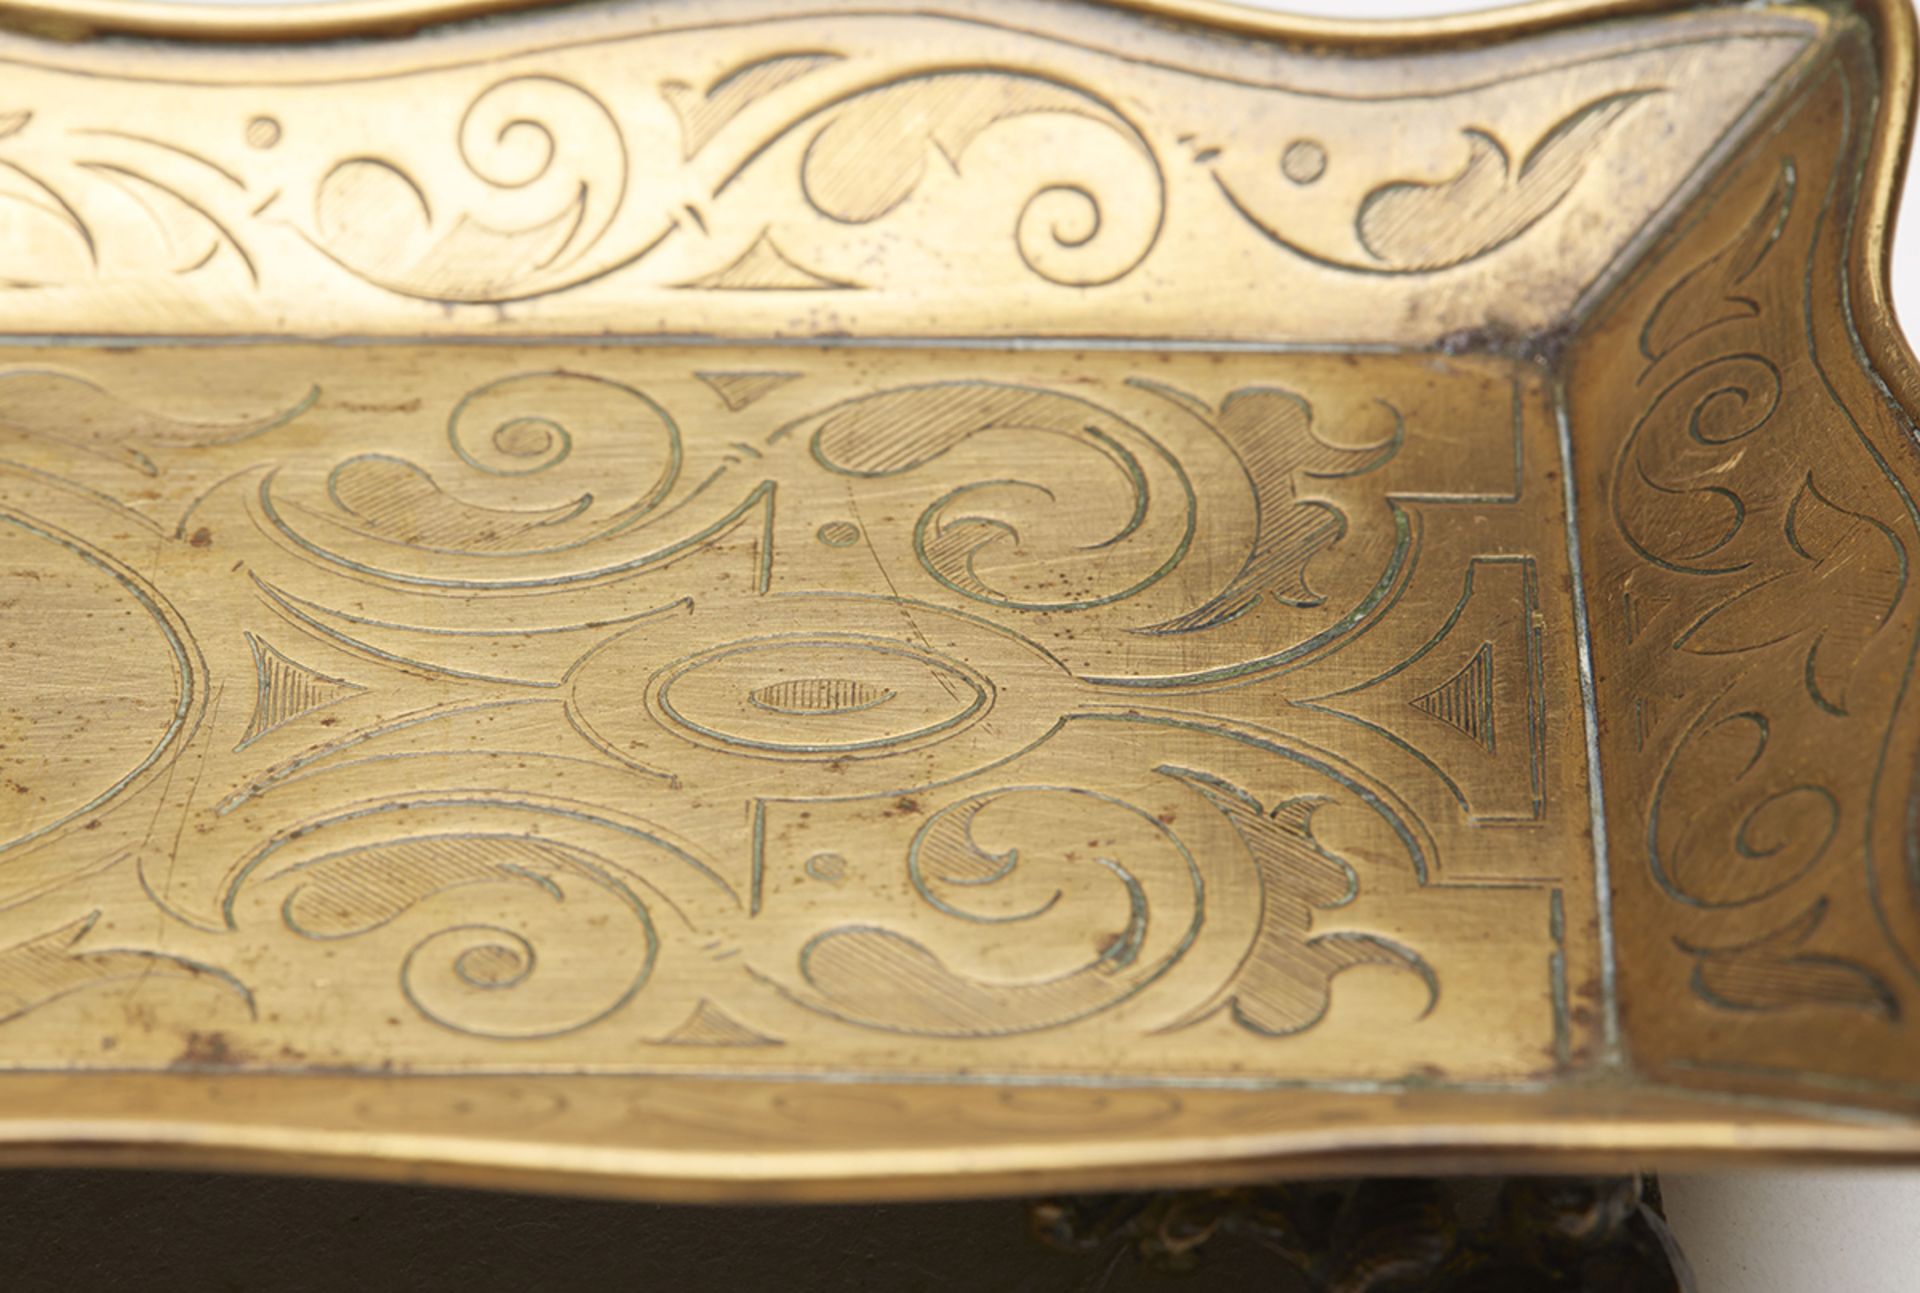 ARTS & CRAFTS ENGRAVED BRASS DESK PEN TRAY c.1890   DIMENSIONS   Length 22cm, Height 3cm   CONDITION - Image 6 of 7